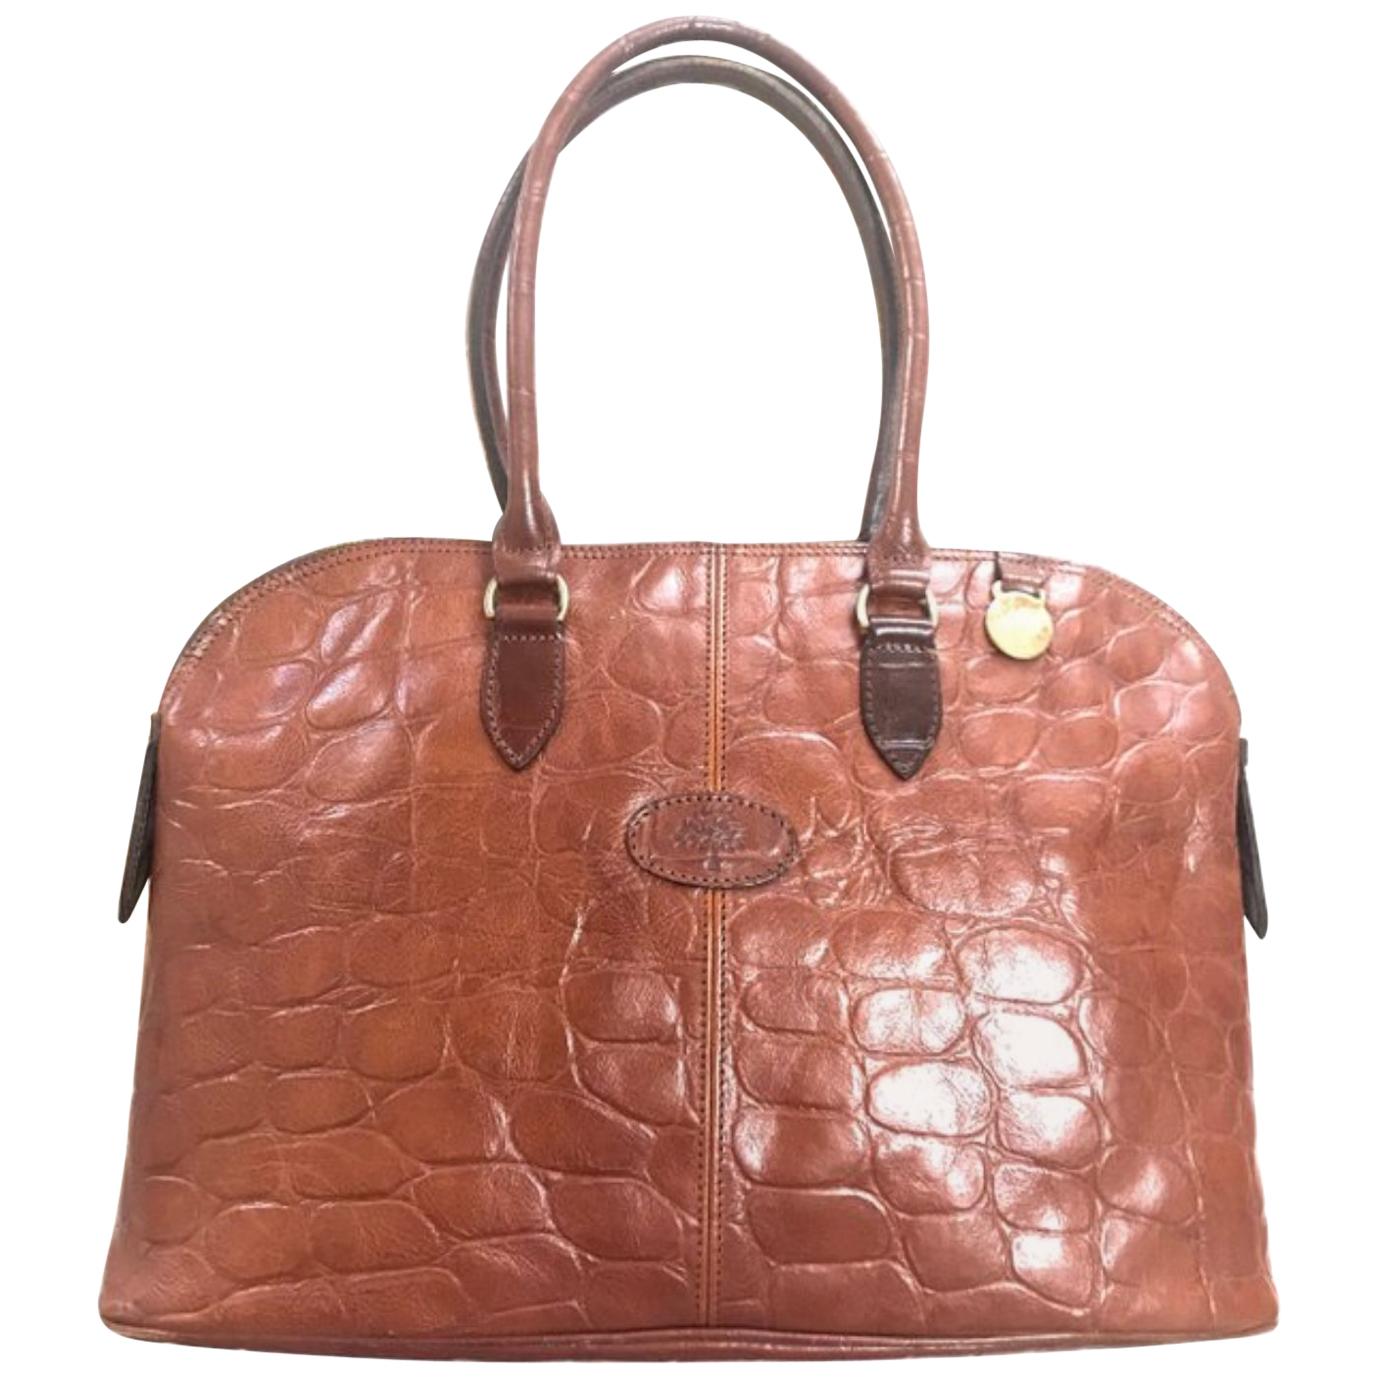 Vintage Mulberry croc embossed brown leather bolide tote bag. By Roger Saul. For Sale